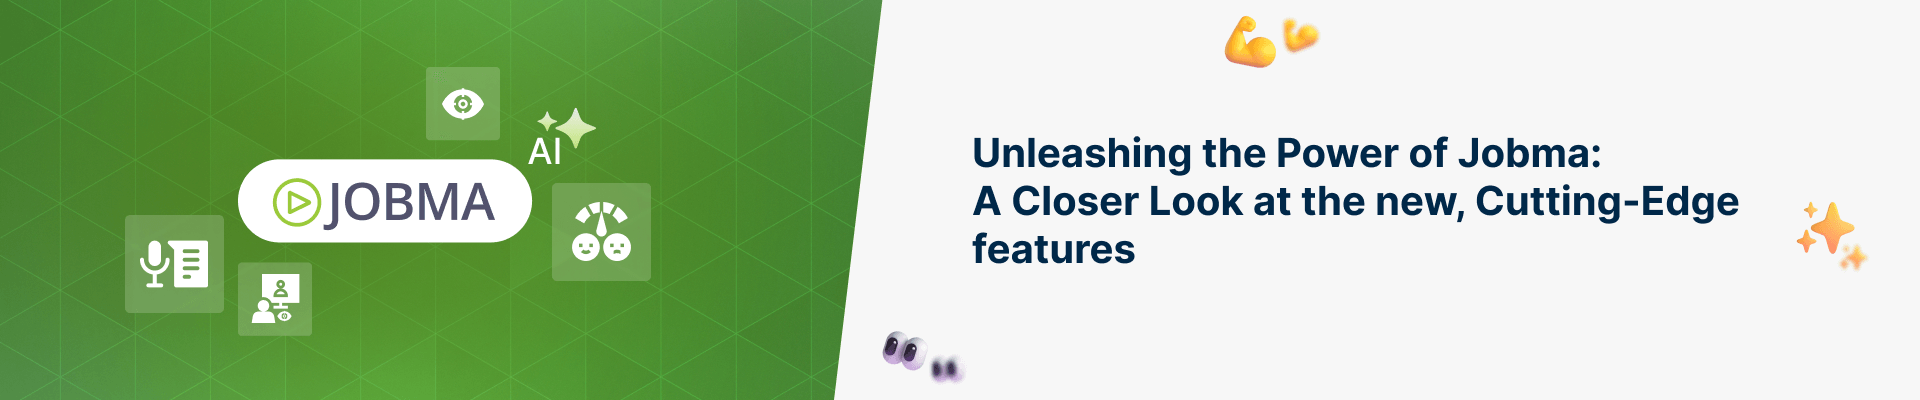 Unleashing the Power of Jobma A Closer Look at the new, Cutting-Edge features.